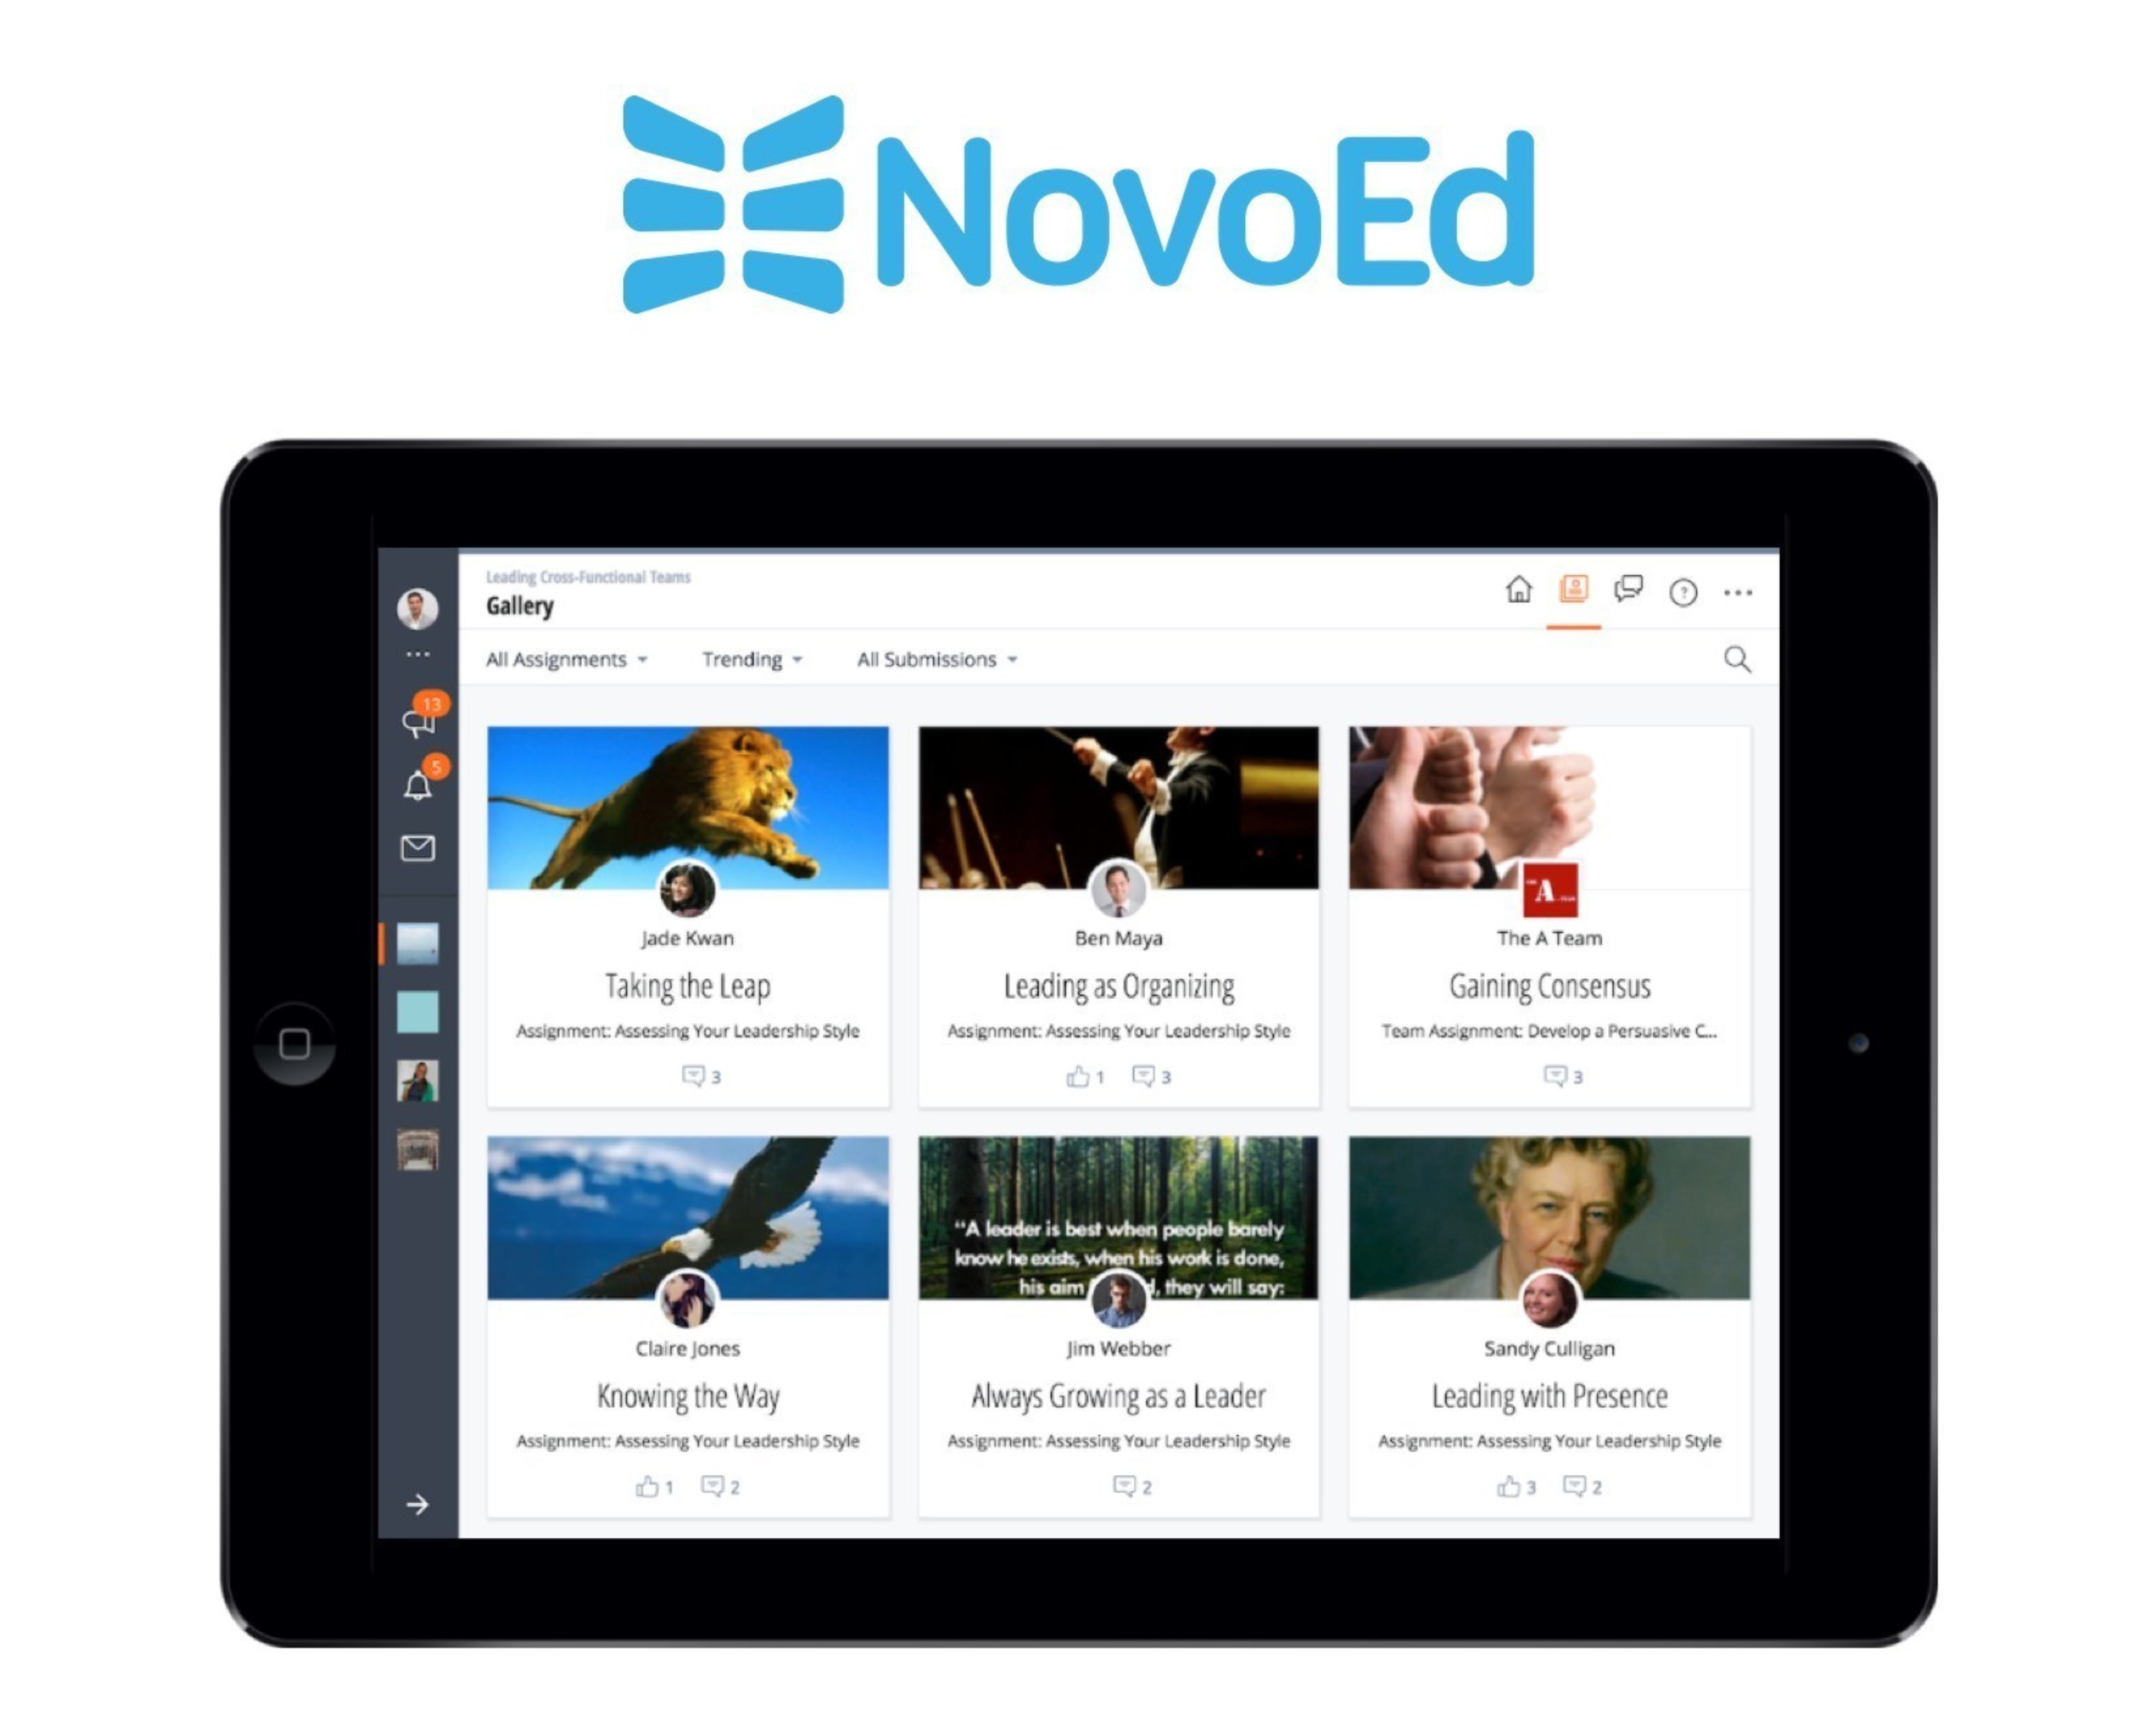 NovoEd is the learning platform for the modern workforce. NovoEd enables customers to deliver more engaging learning experiences that transform their business. The modern, mobile interface provides a consumer-grade experience, on-demand from any device. The platform seamlessly integrates media types to promote deliberate practice and active learning. An effective and experiential approach allows for applied project work and collaboration in small groups. Small group interaction triggers social learning, which boosts effectiveness and increases accountability.  A social, engaging environment prompts learners to interact in context and share their work in project galleries and learner profiles. Learners are able to extend learning beyond the course with peer-to-peer connections and feedback from peers and mentors. Powerful Reporting and Management tools provide secure, real-time data for a detailed view of learner engagement and content quality. The platform integrates with existing enterprise systems.